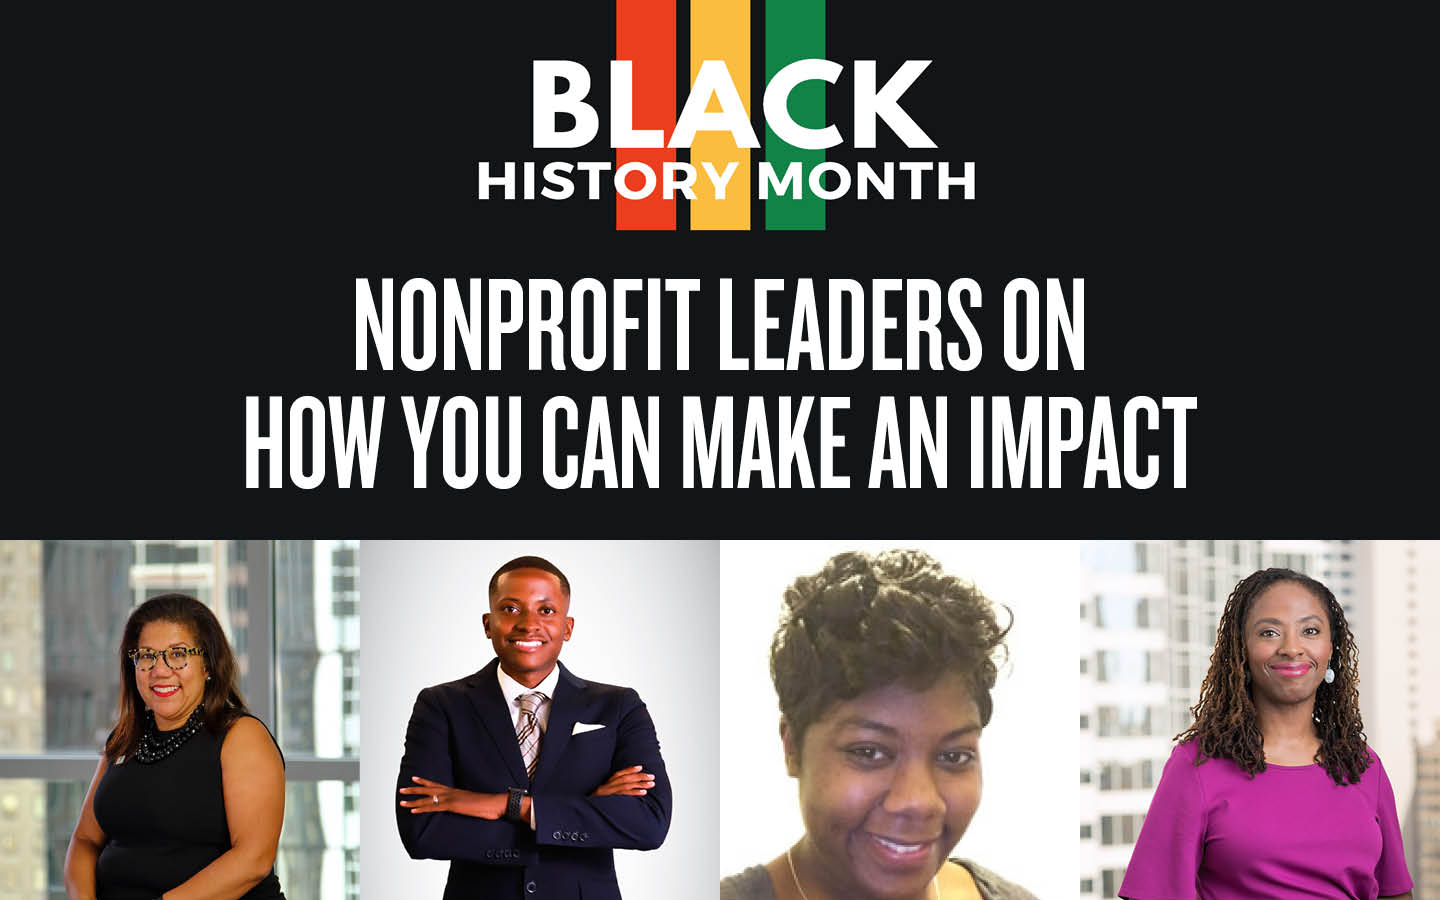 Nonprofit leaders on how you can make an impact: Valerie Barker Waller, Marlon Haywood, Jessica Hollie, Sharon Bush